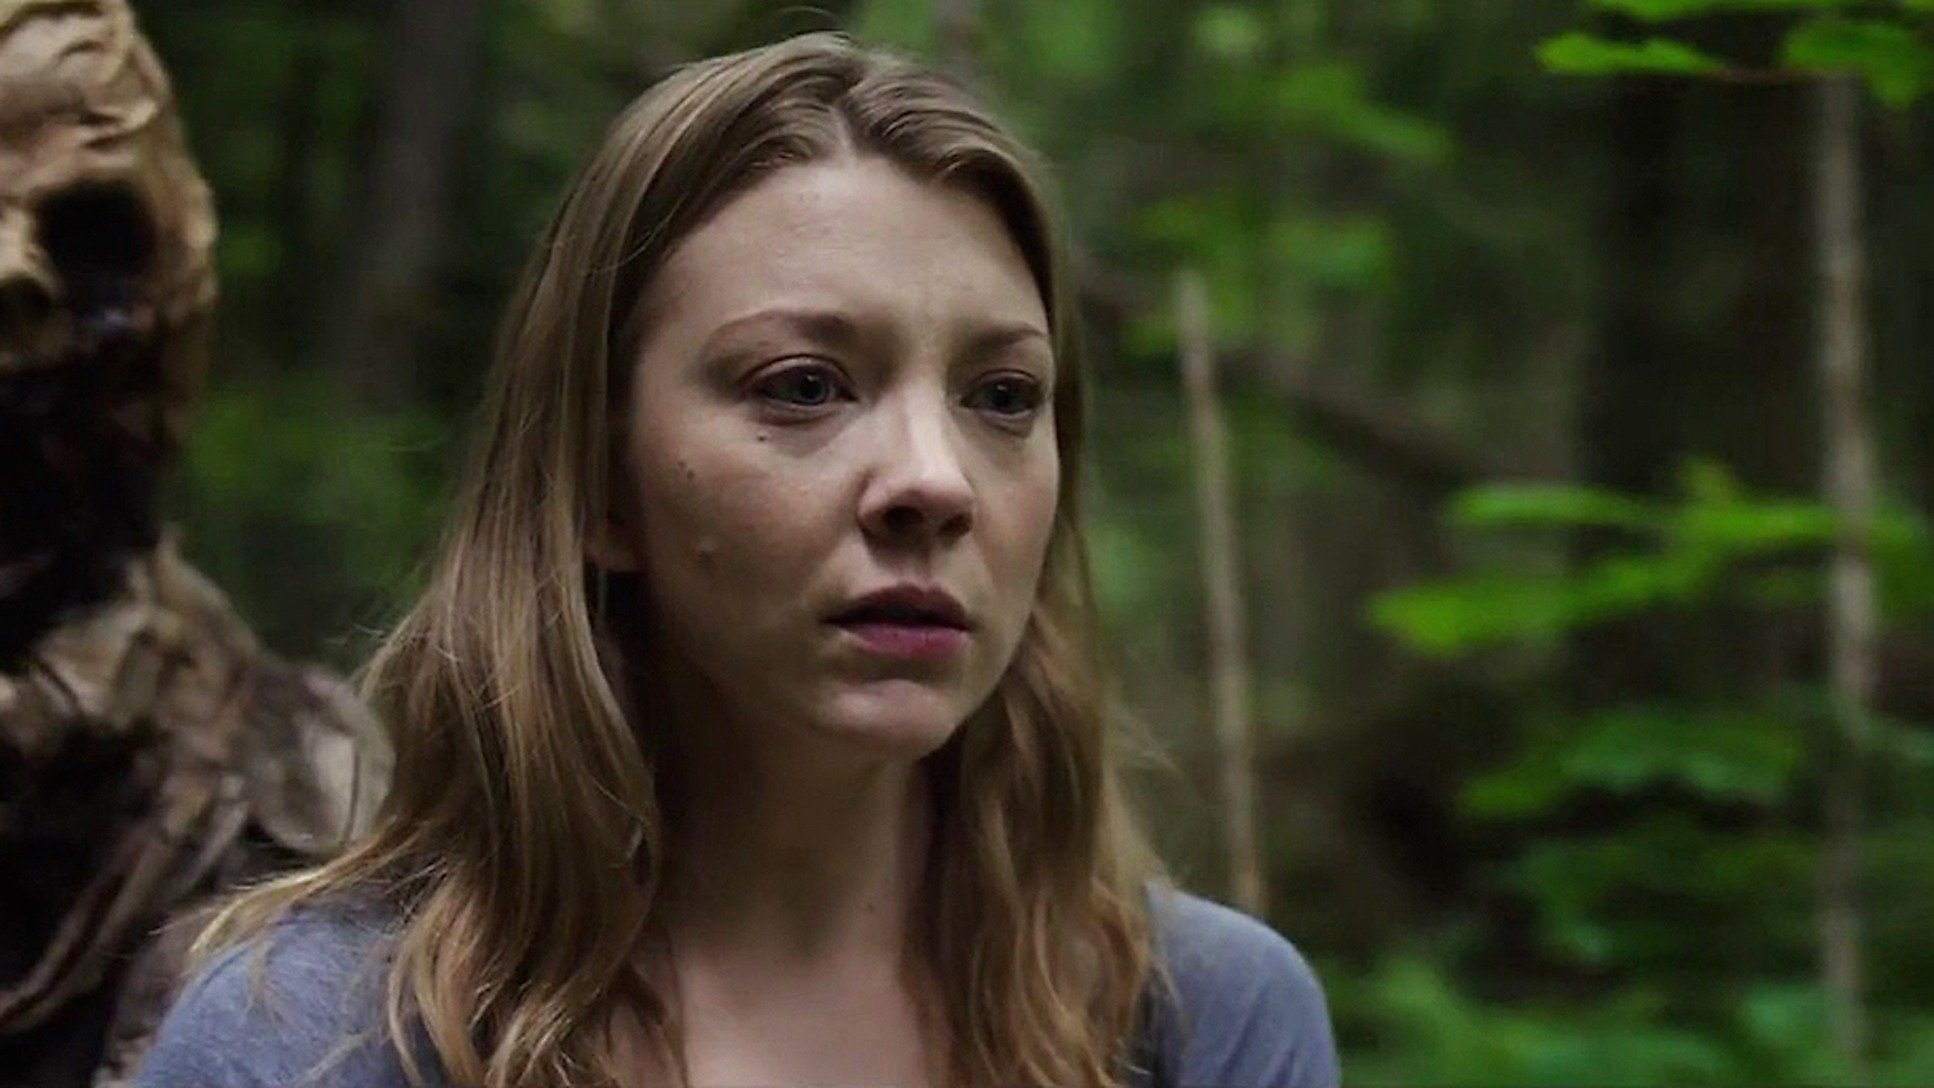 ‘The Forest’ loses its way as a horror film - SFGate